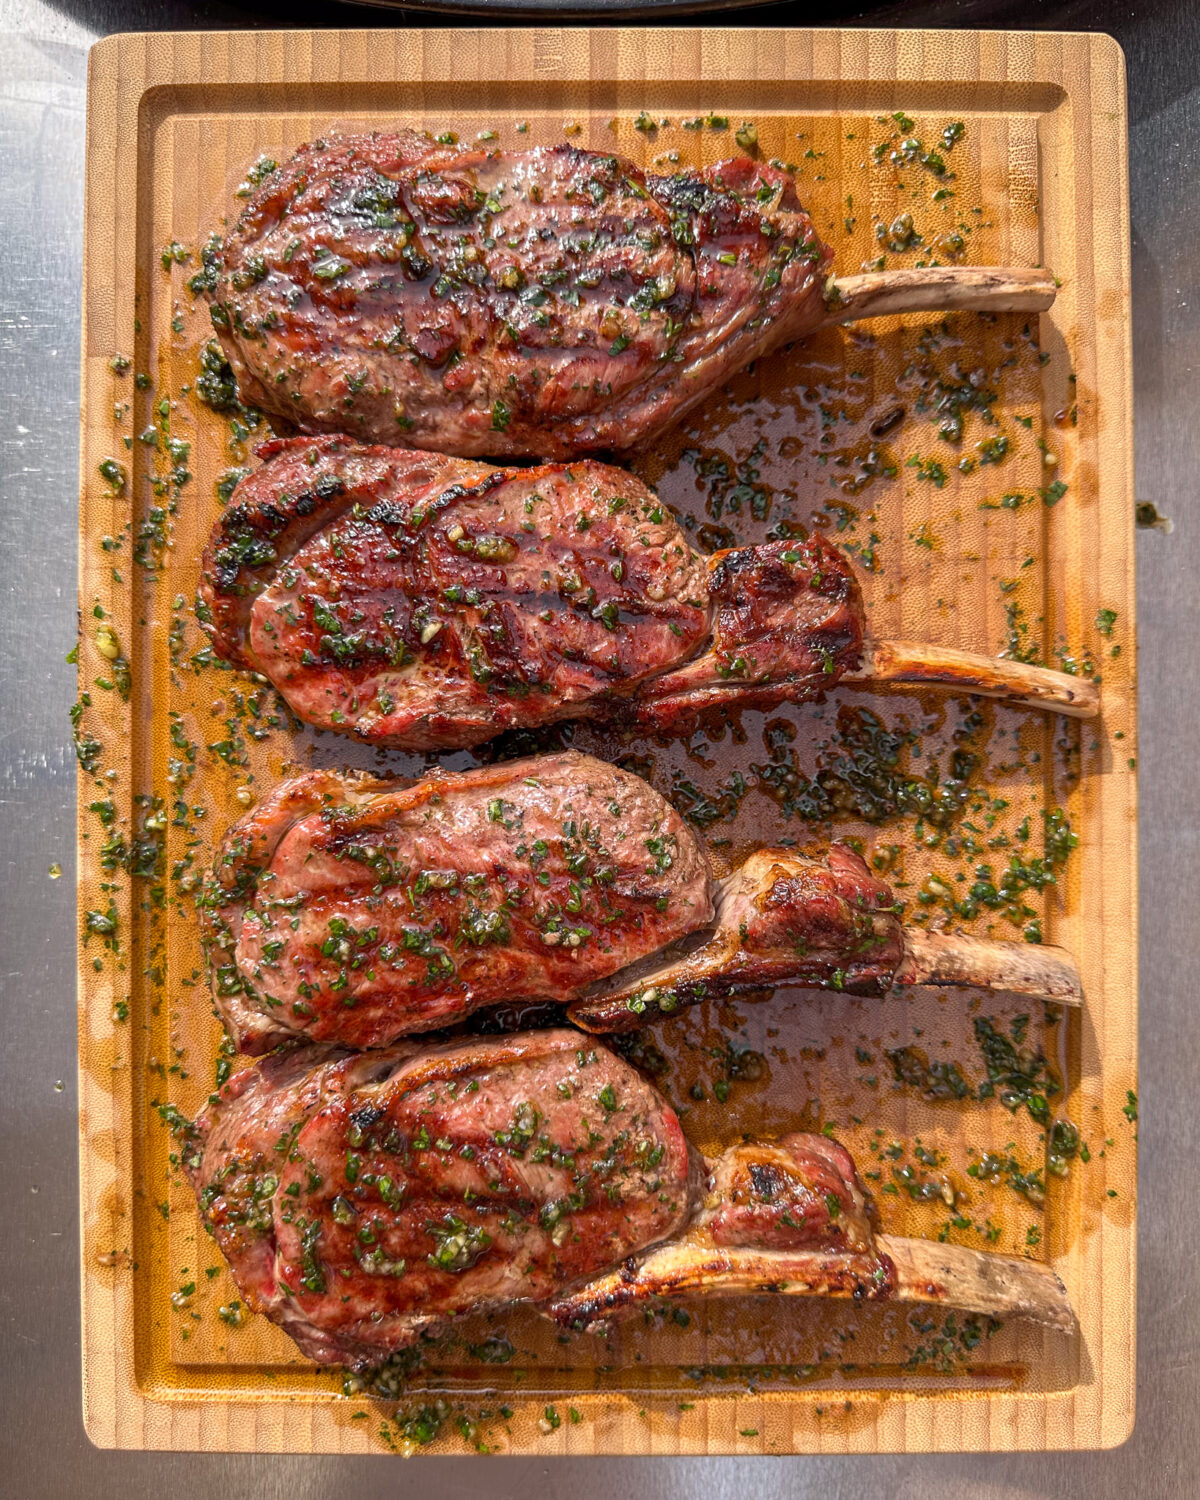 Four veal chops resting on a cutting board with board sauce.